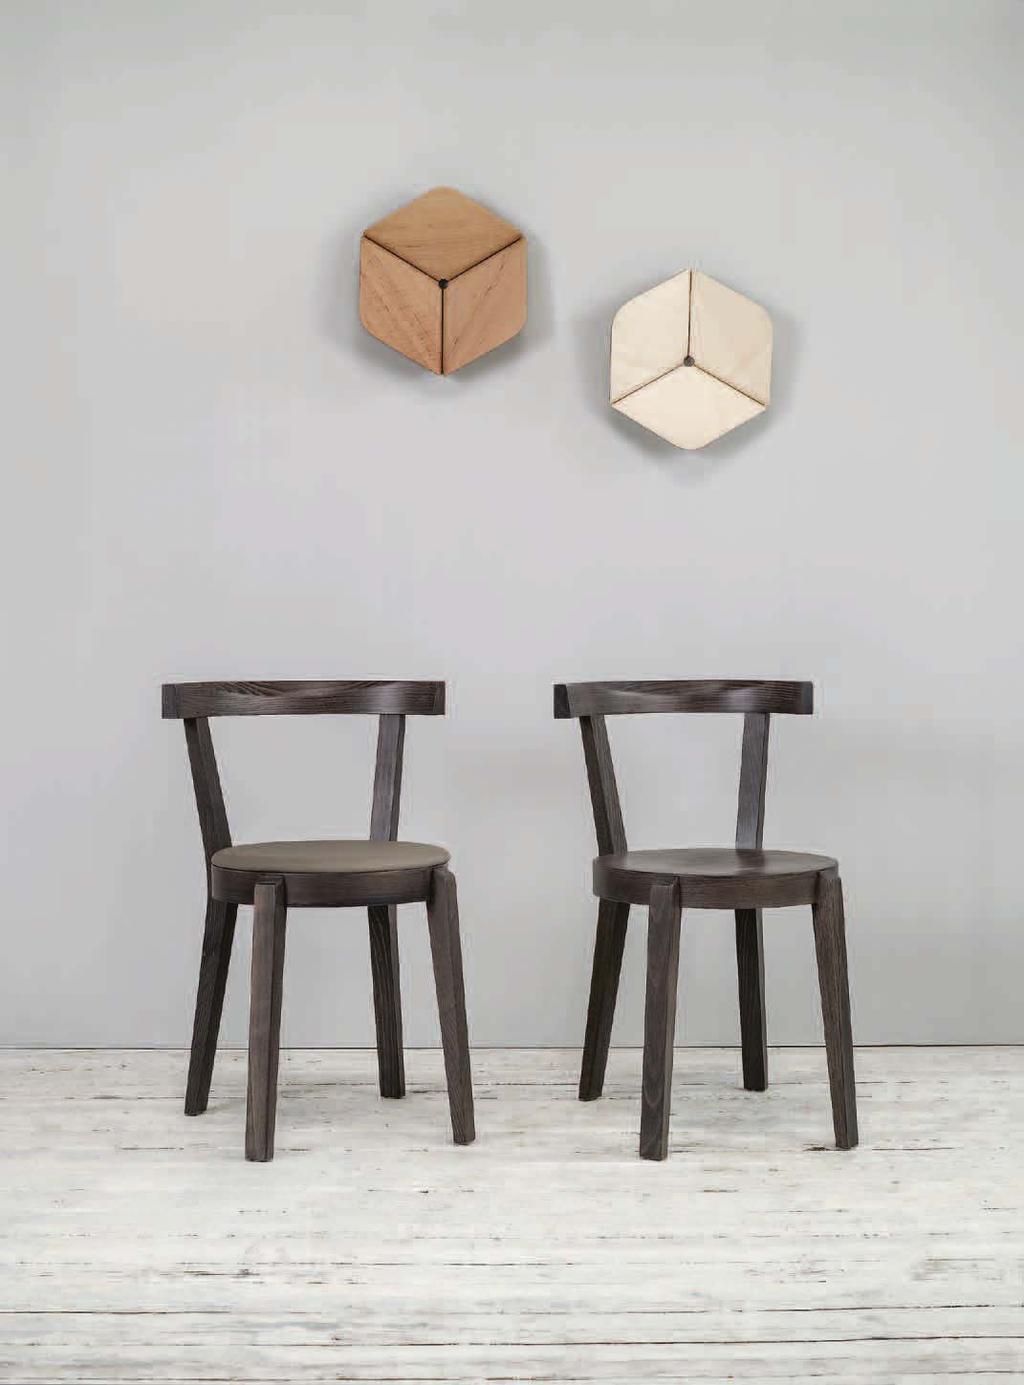 The barstool with a stainless steel or black leg connection supplements the Punton series.